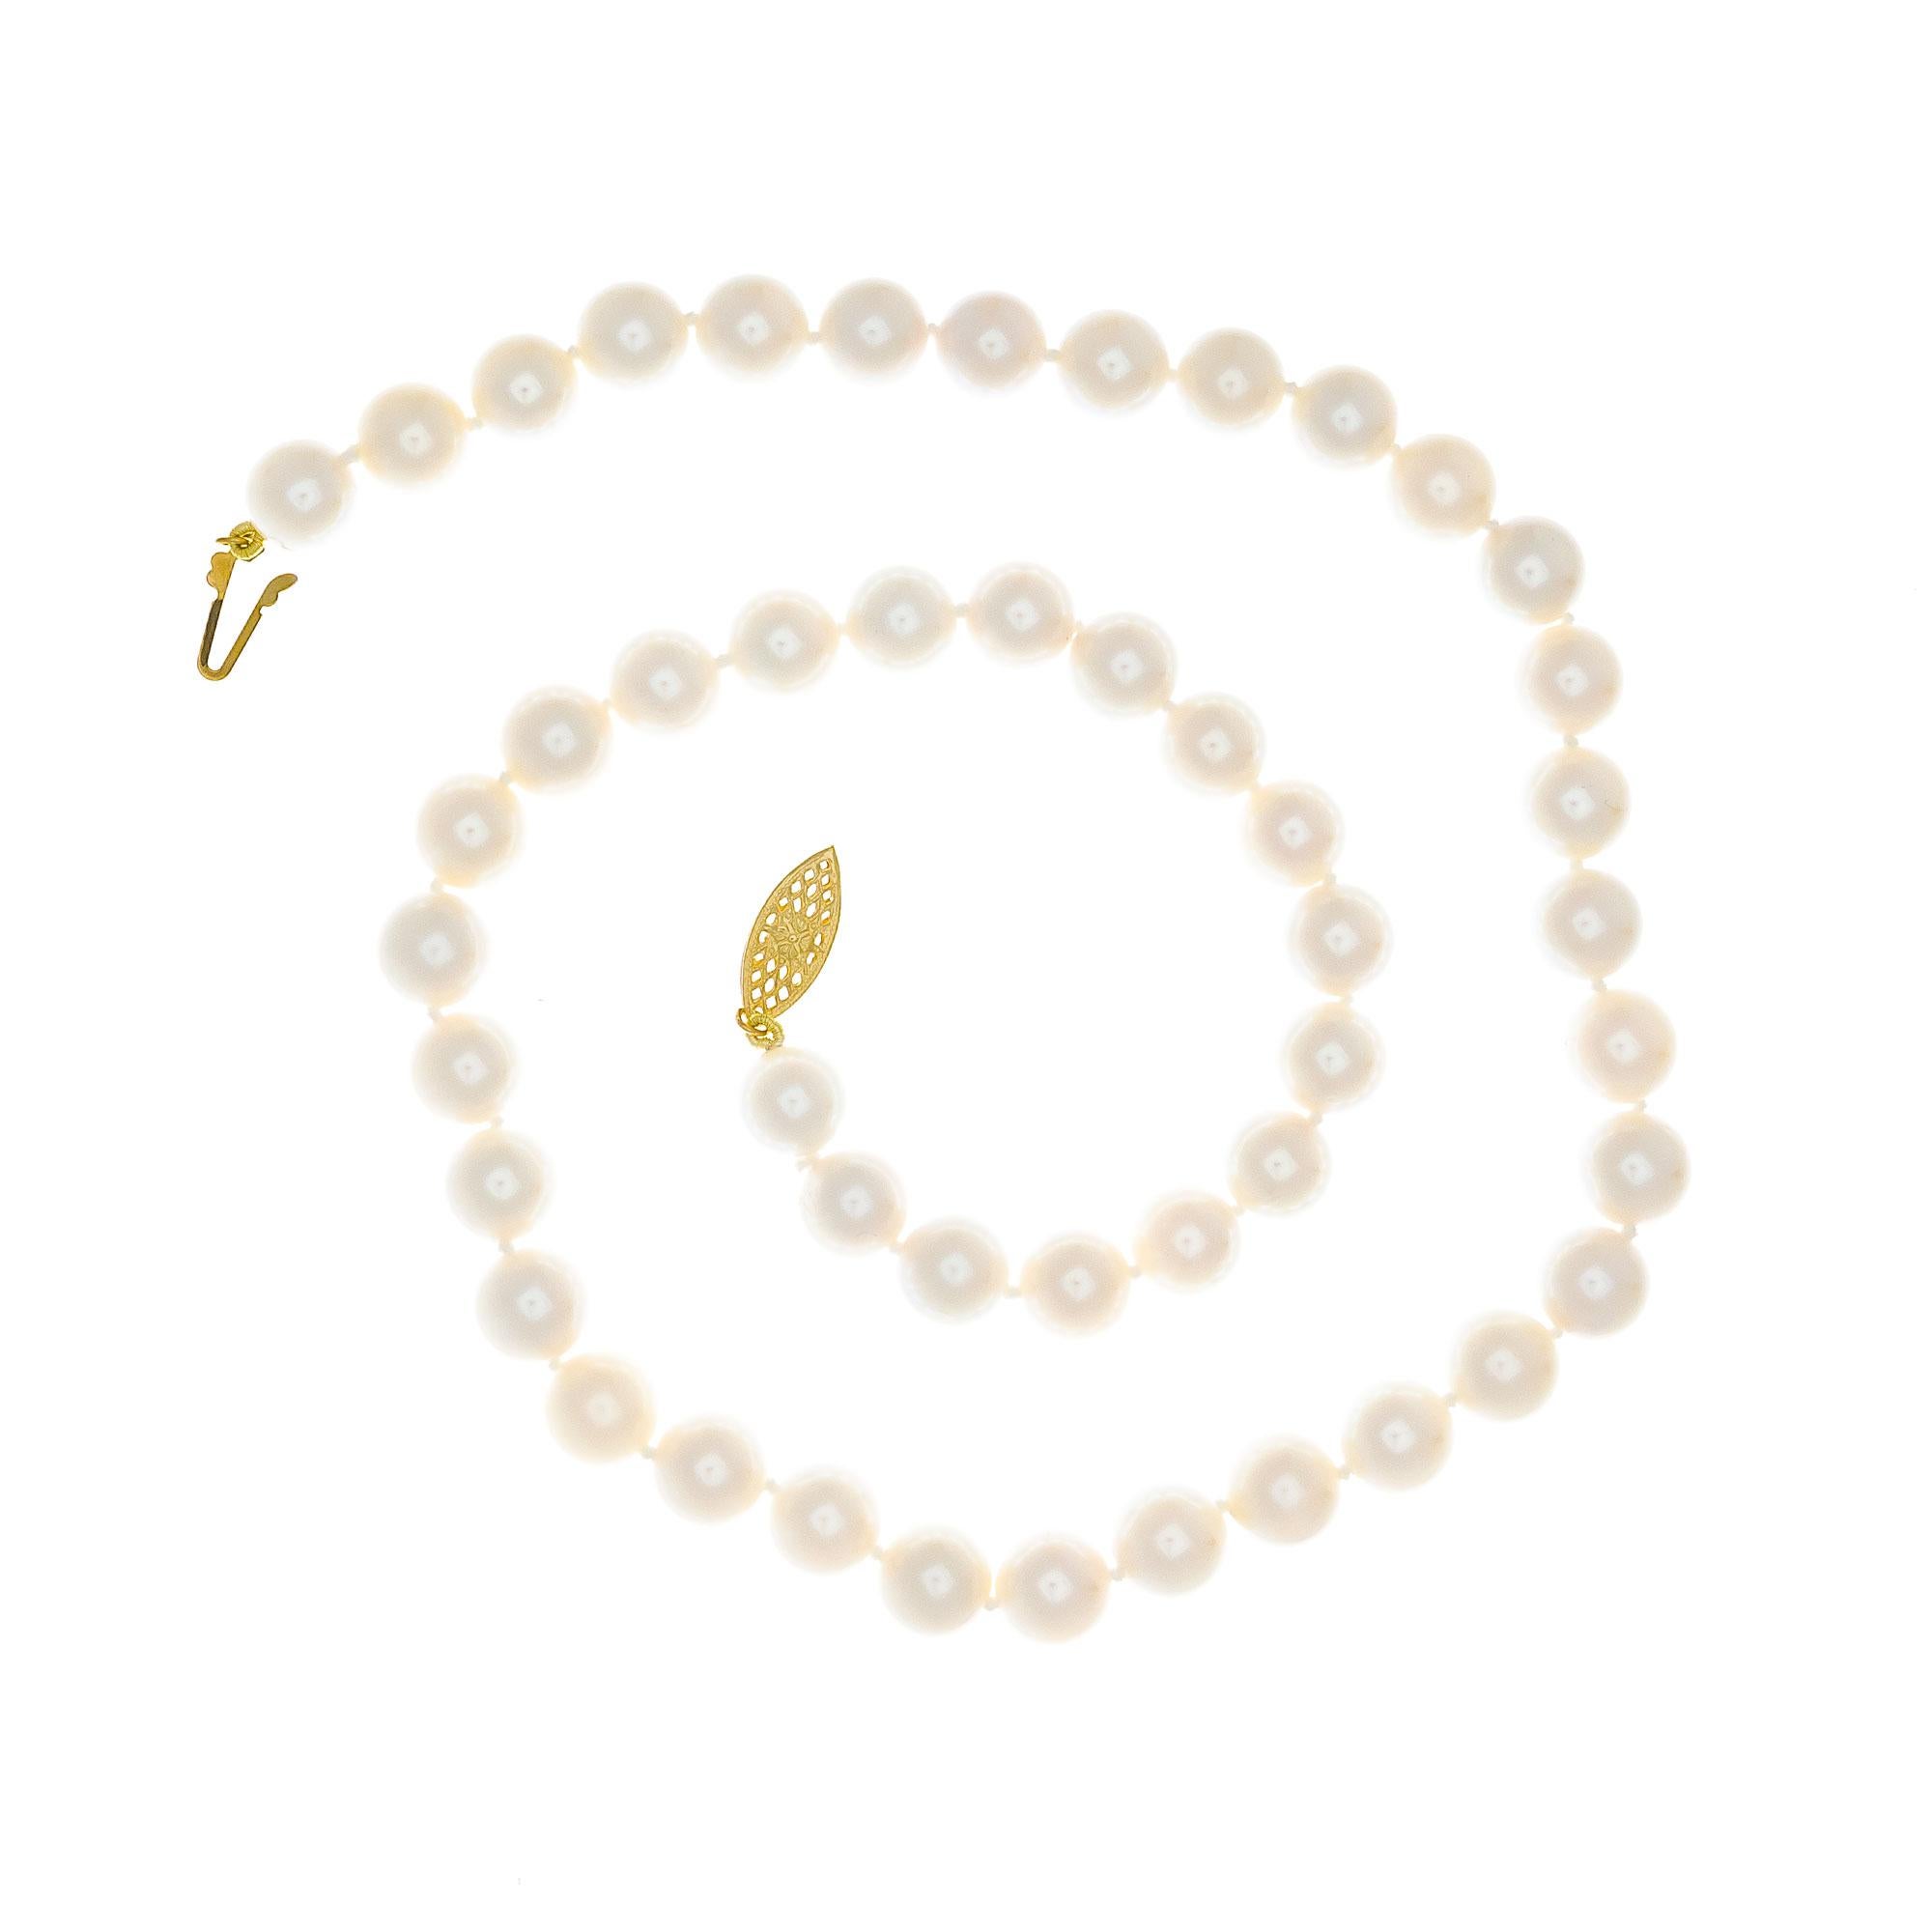 48 cultured pearl pearl necklace. White with natural cream color overtone. Very good lustre, few blemishes. Well matched pearls. 18.5 inches long. 

48 cultured white crème hues pearls, 8mm
14k yellow gold
Stamped: 14k
38.6 grams
Total length: 18.5